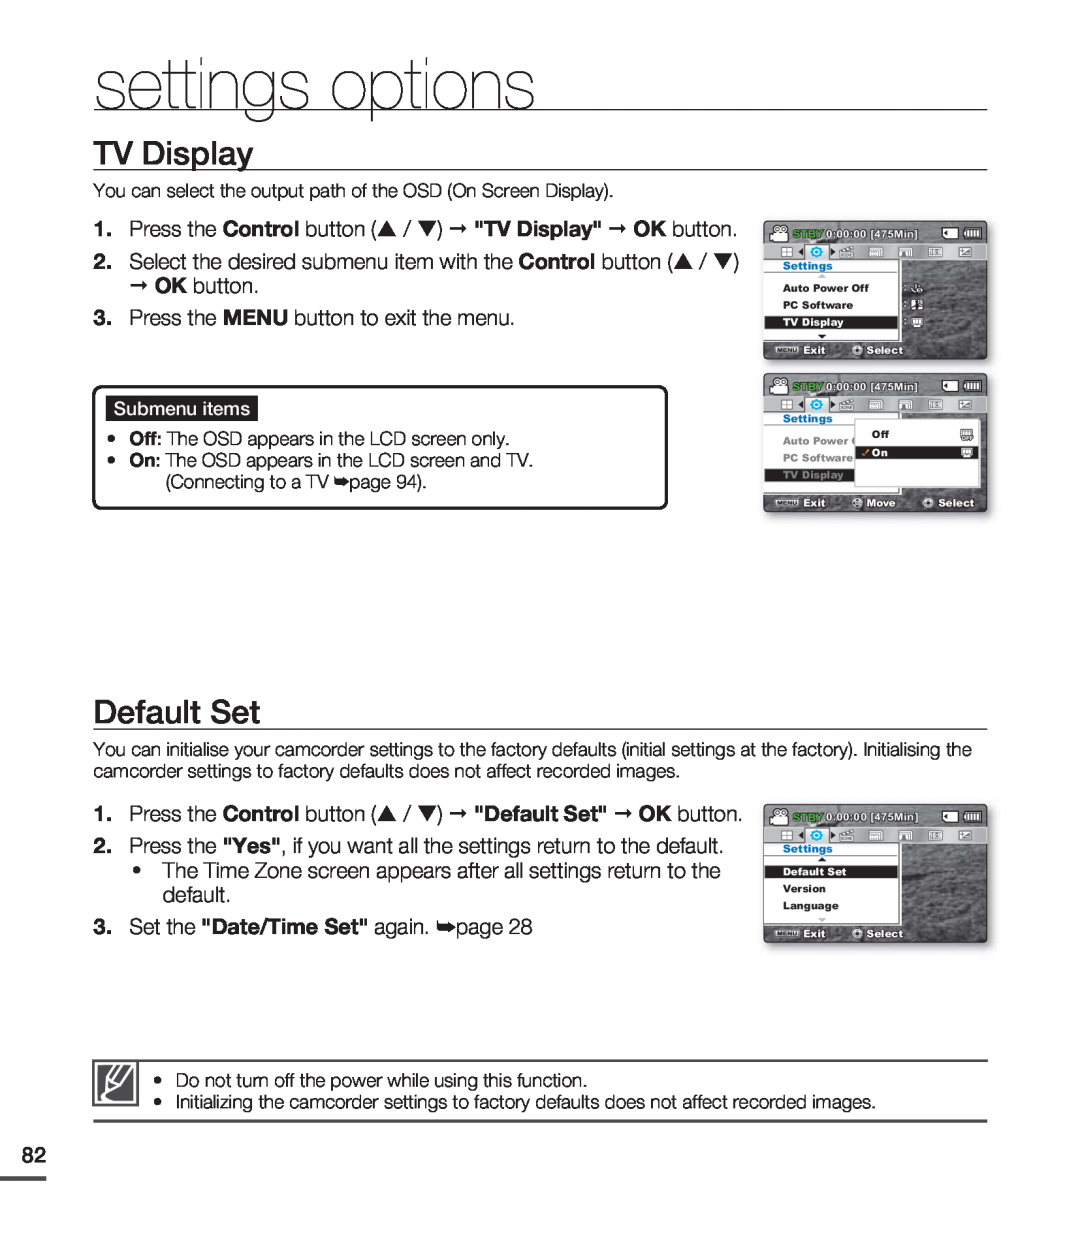 Samsung SMX-C24RP/MEA manual TV Display, Default Set, Press the Yes, if you want all the settings return to the default 